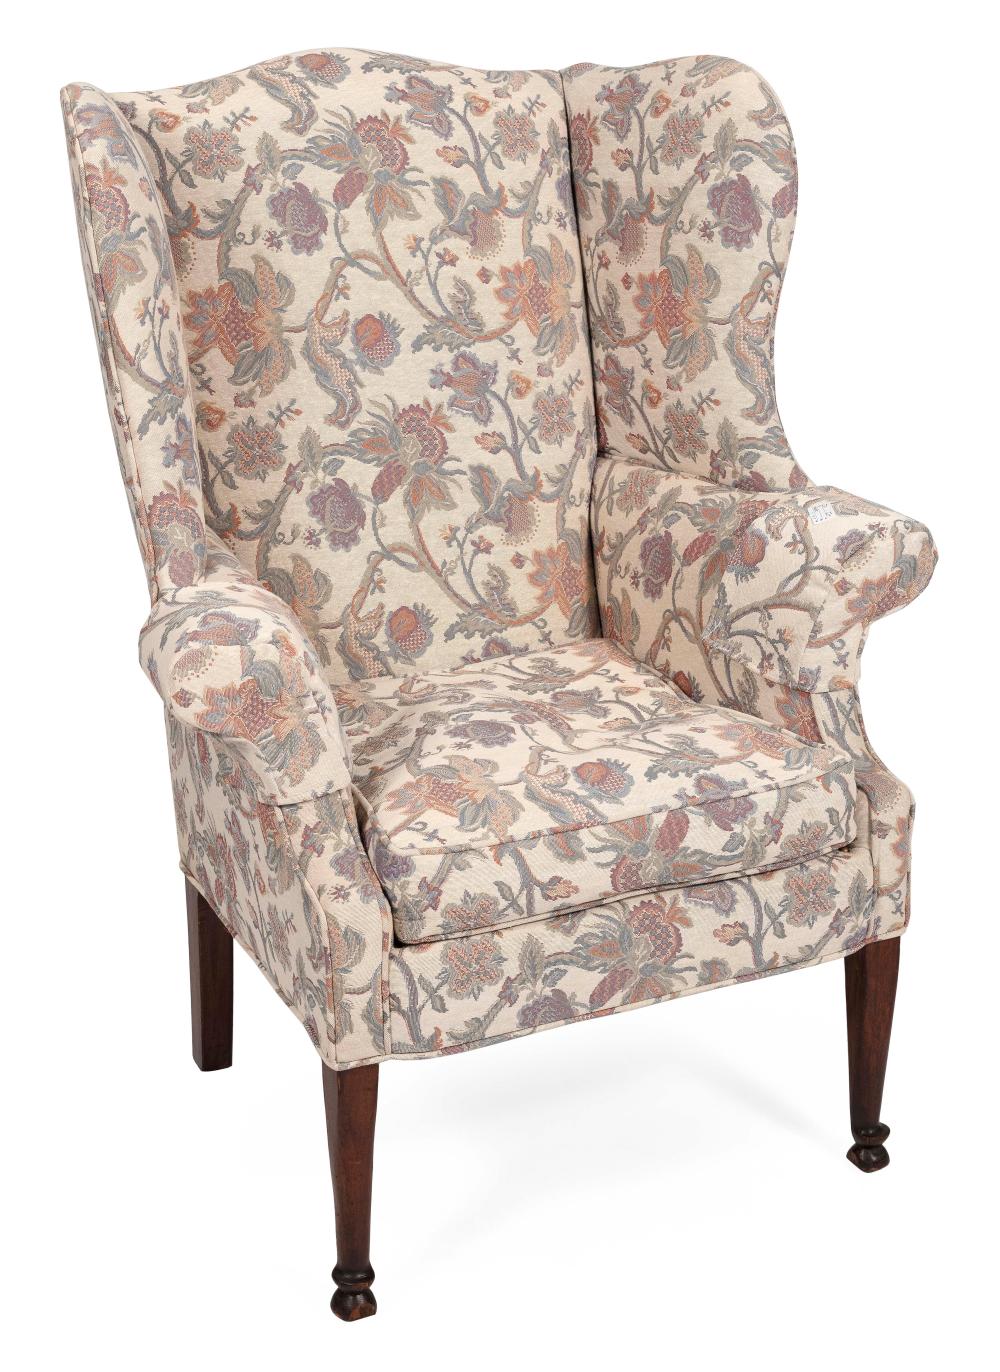 ENGLISH QUEEN ANNE-STYLE WING CHAIR